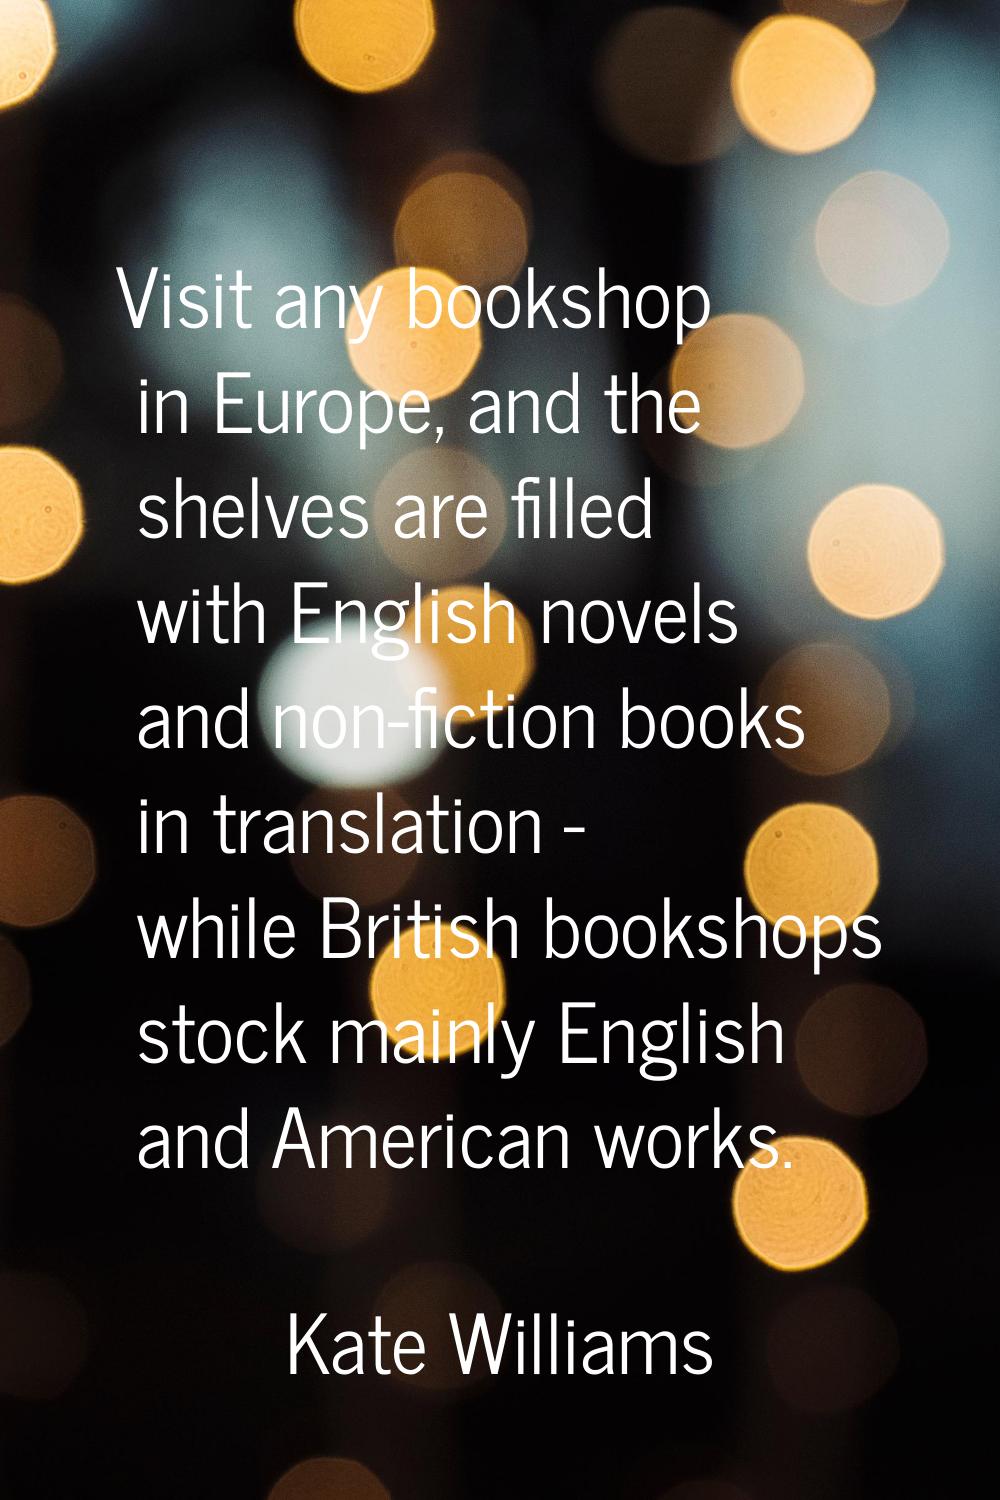 Visit any bookshop in Europe, and the shelves are filled with English novels and non-fiction books 